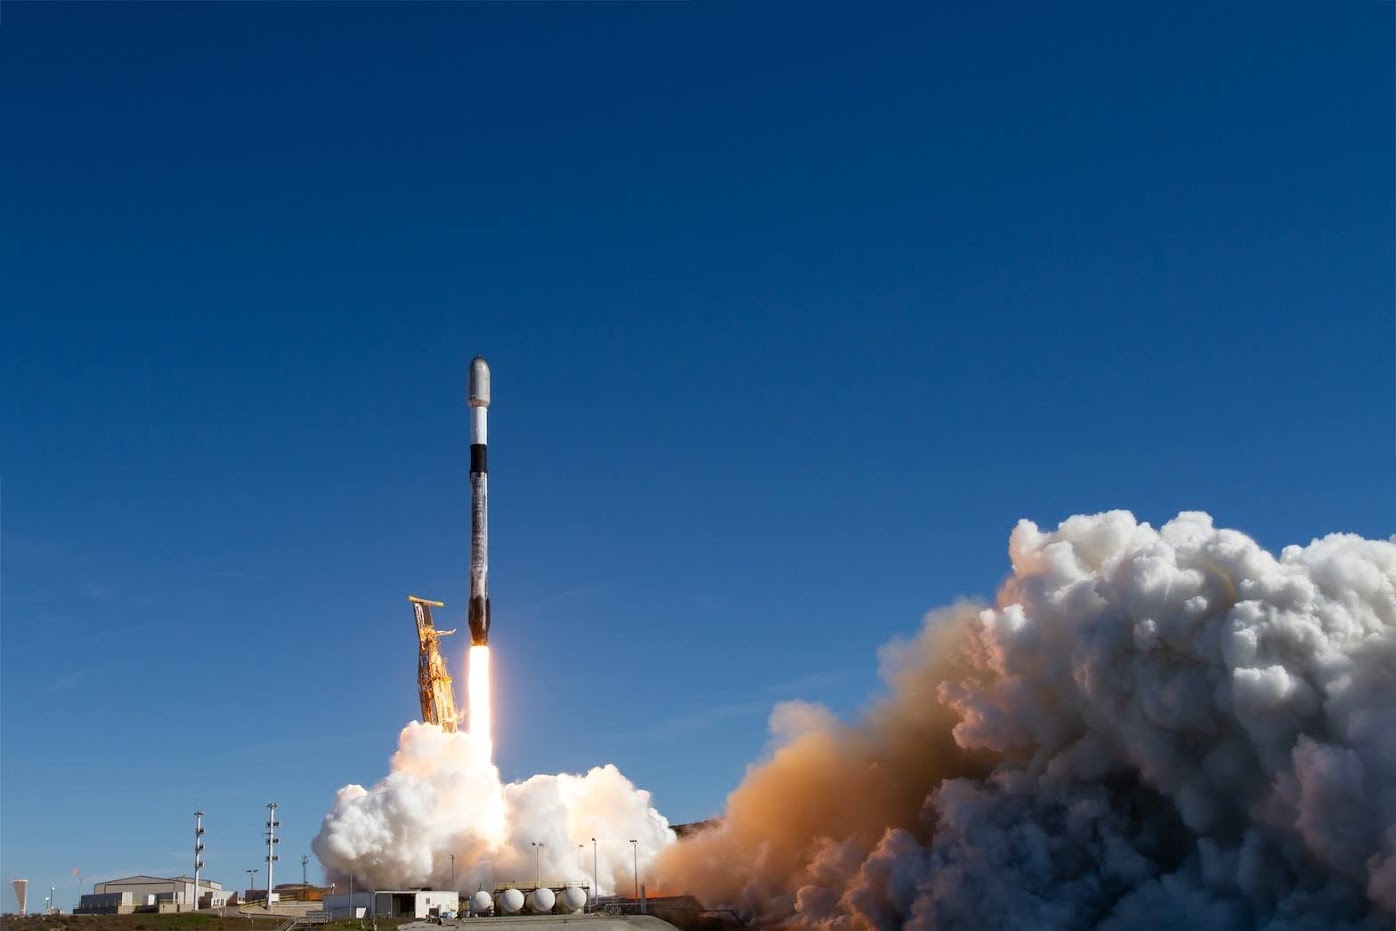 "PEARL" was successfully launched on November 12th aboard SpaceX's Falcon 9 in the United States. Photo courtesy of SpaceX